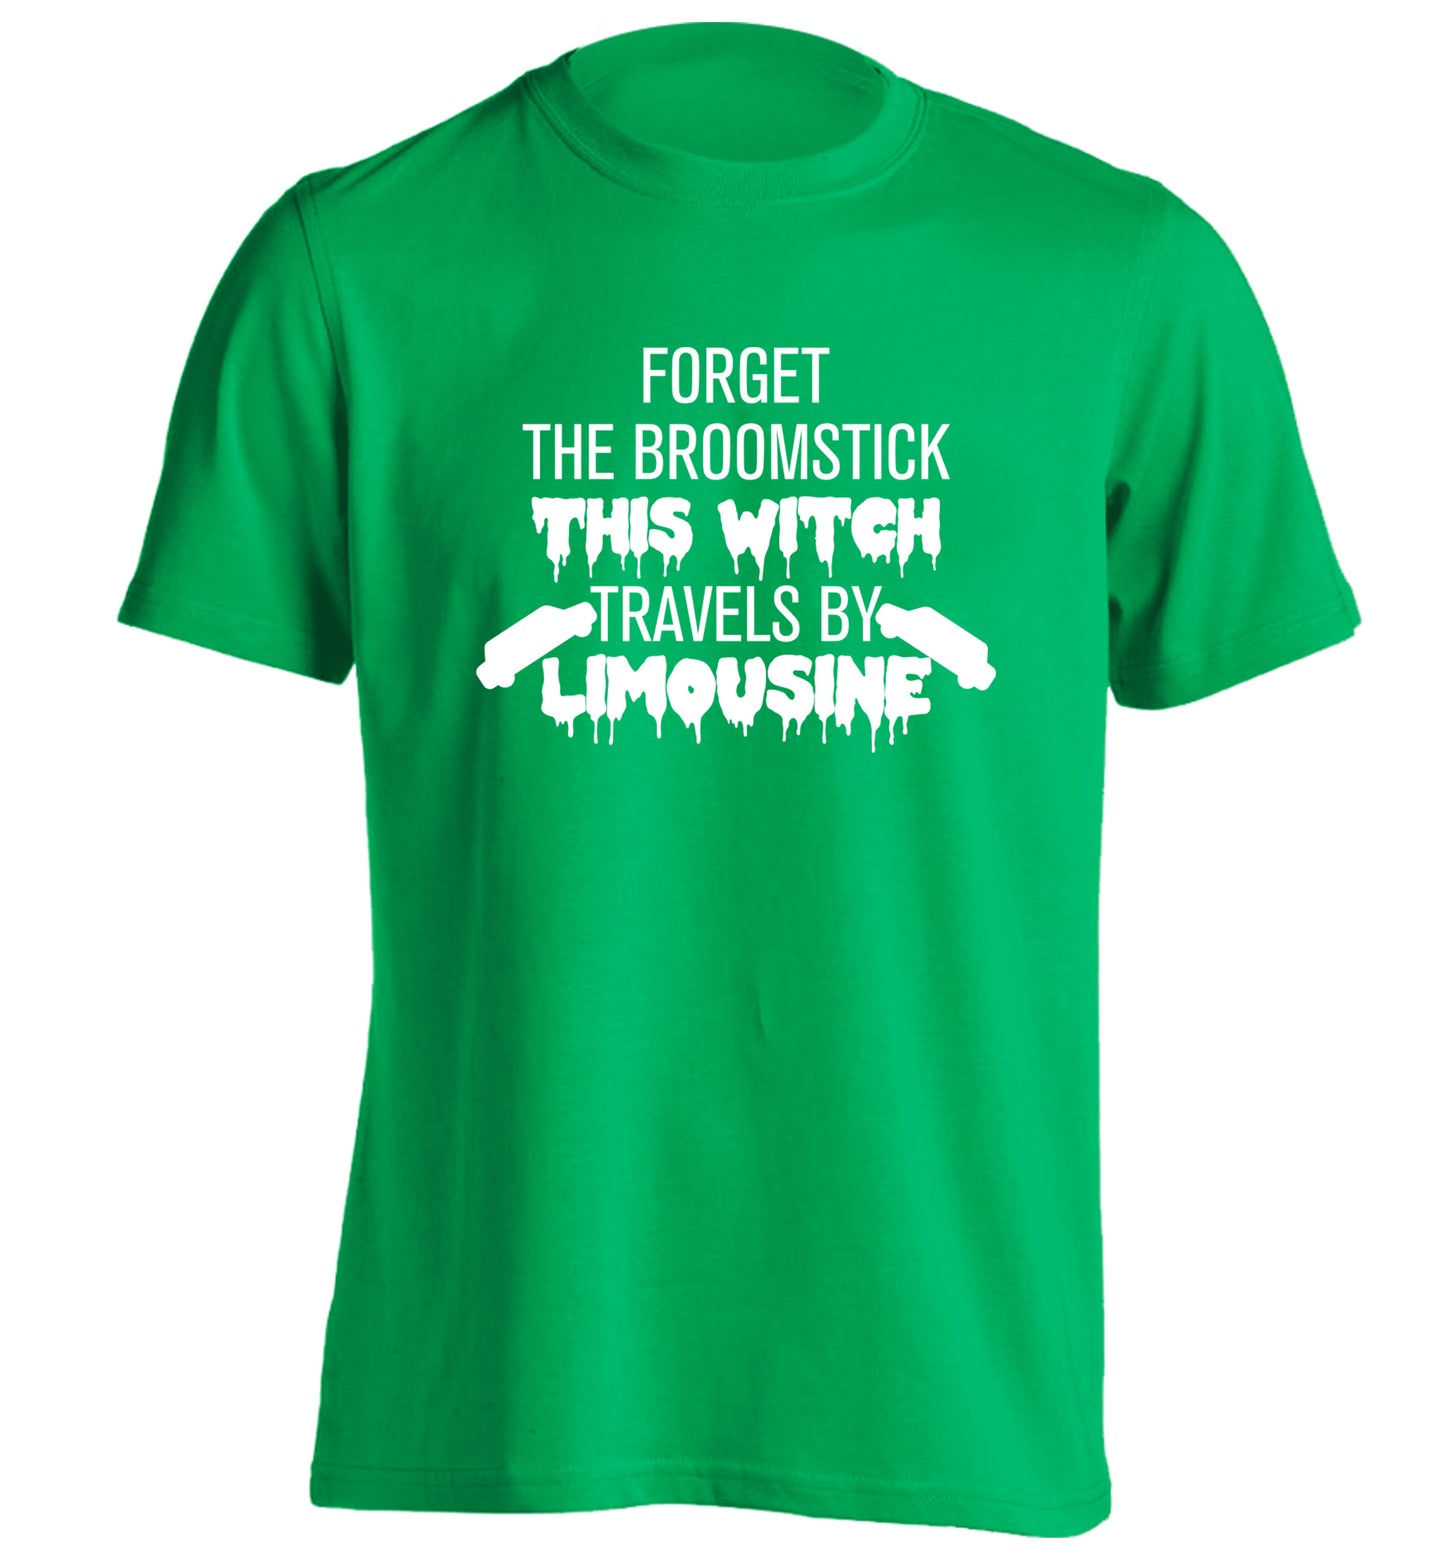 Forget the broomstick this witch travels by limousine adults unisexgreen Tshirt 2XL